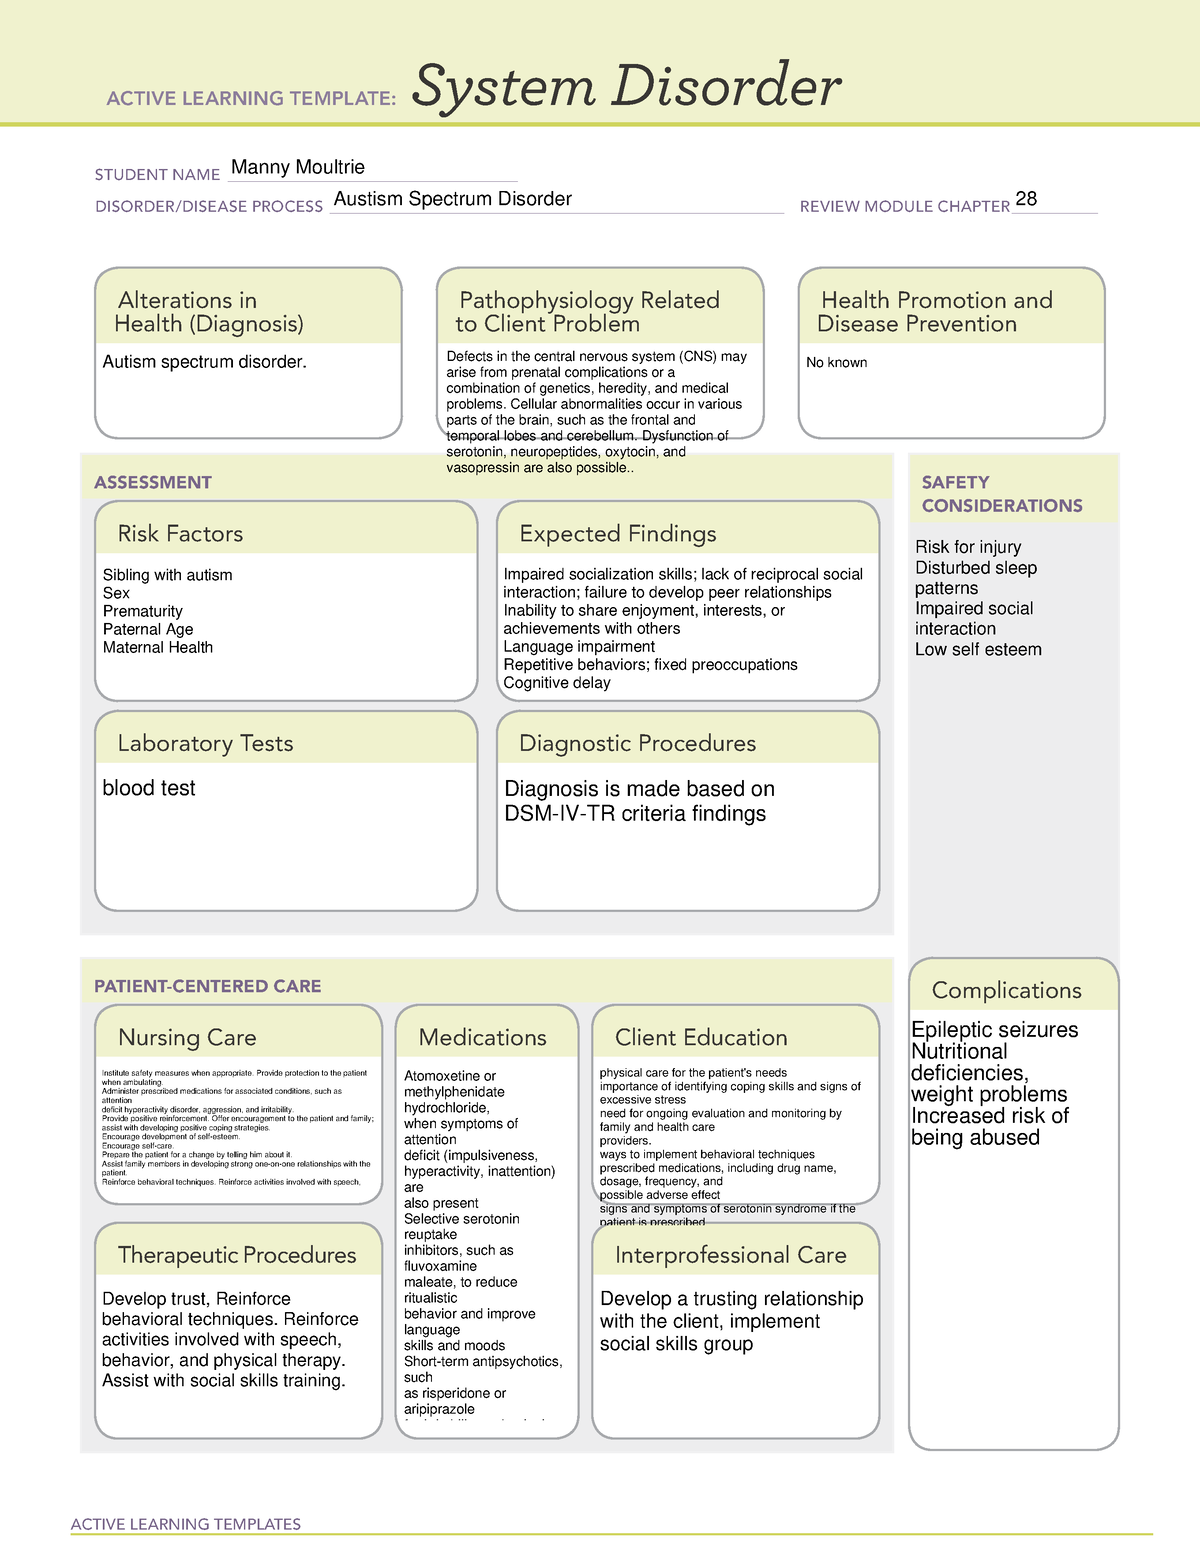 autism-system-disorder-ati-template-active-learning-templates